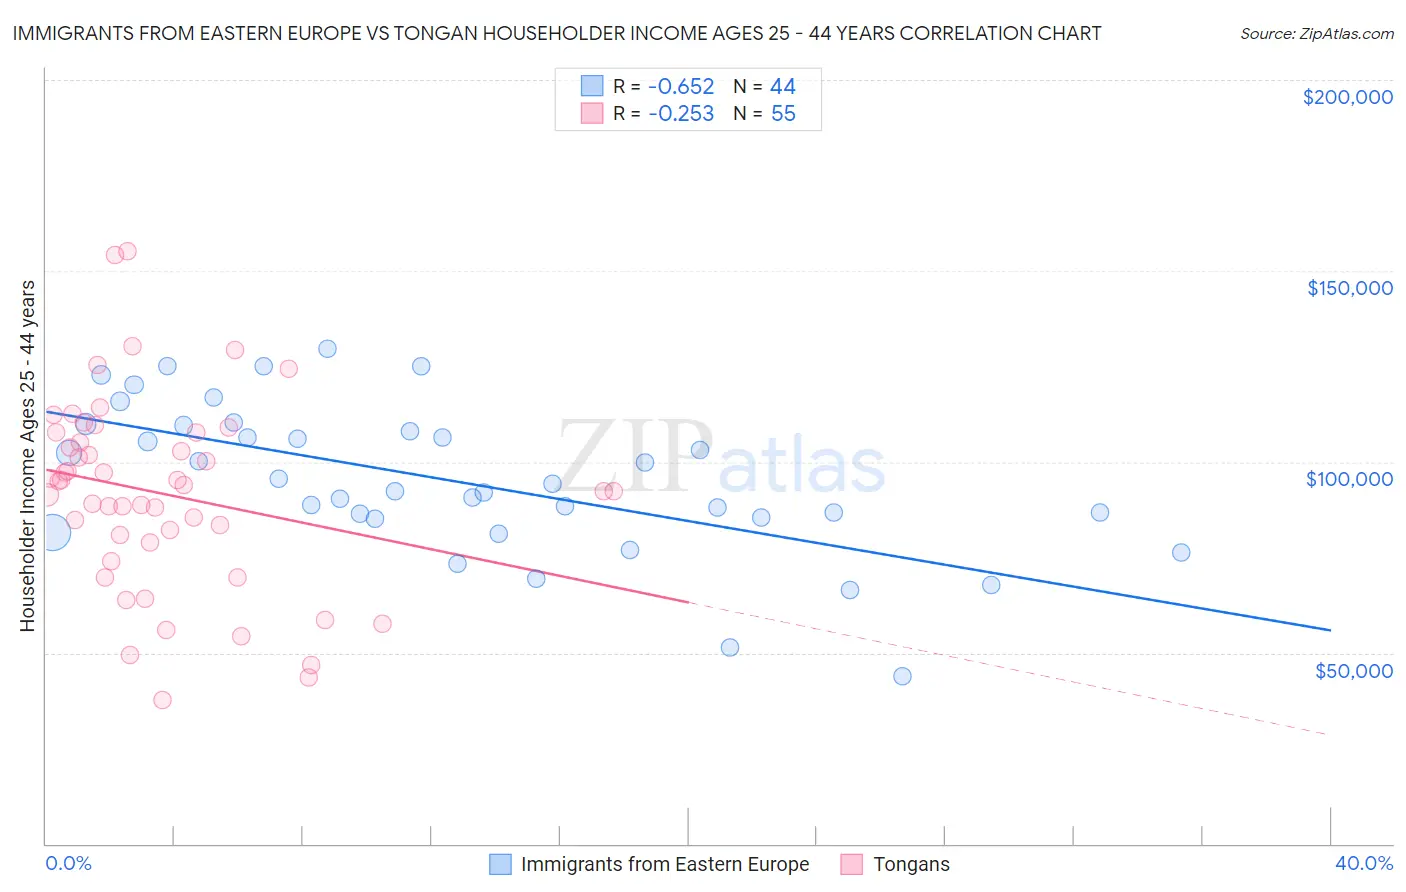 Immigrants from Eastern Europe vs Tongan Householder Income Ages 25 - 44 years